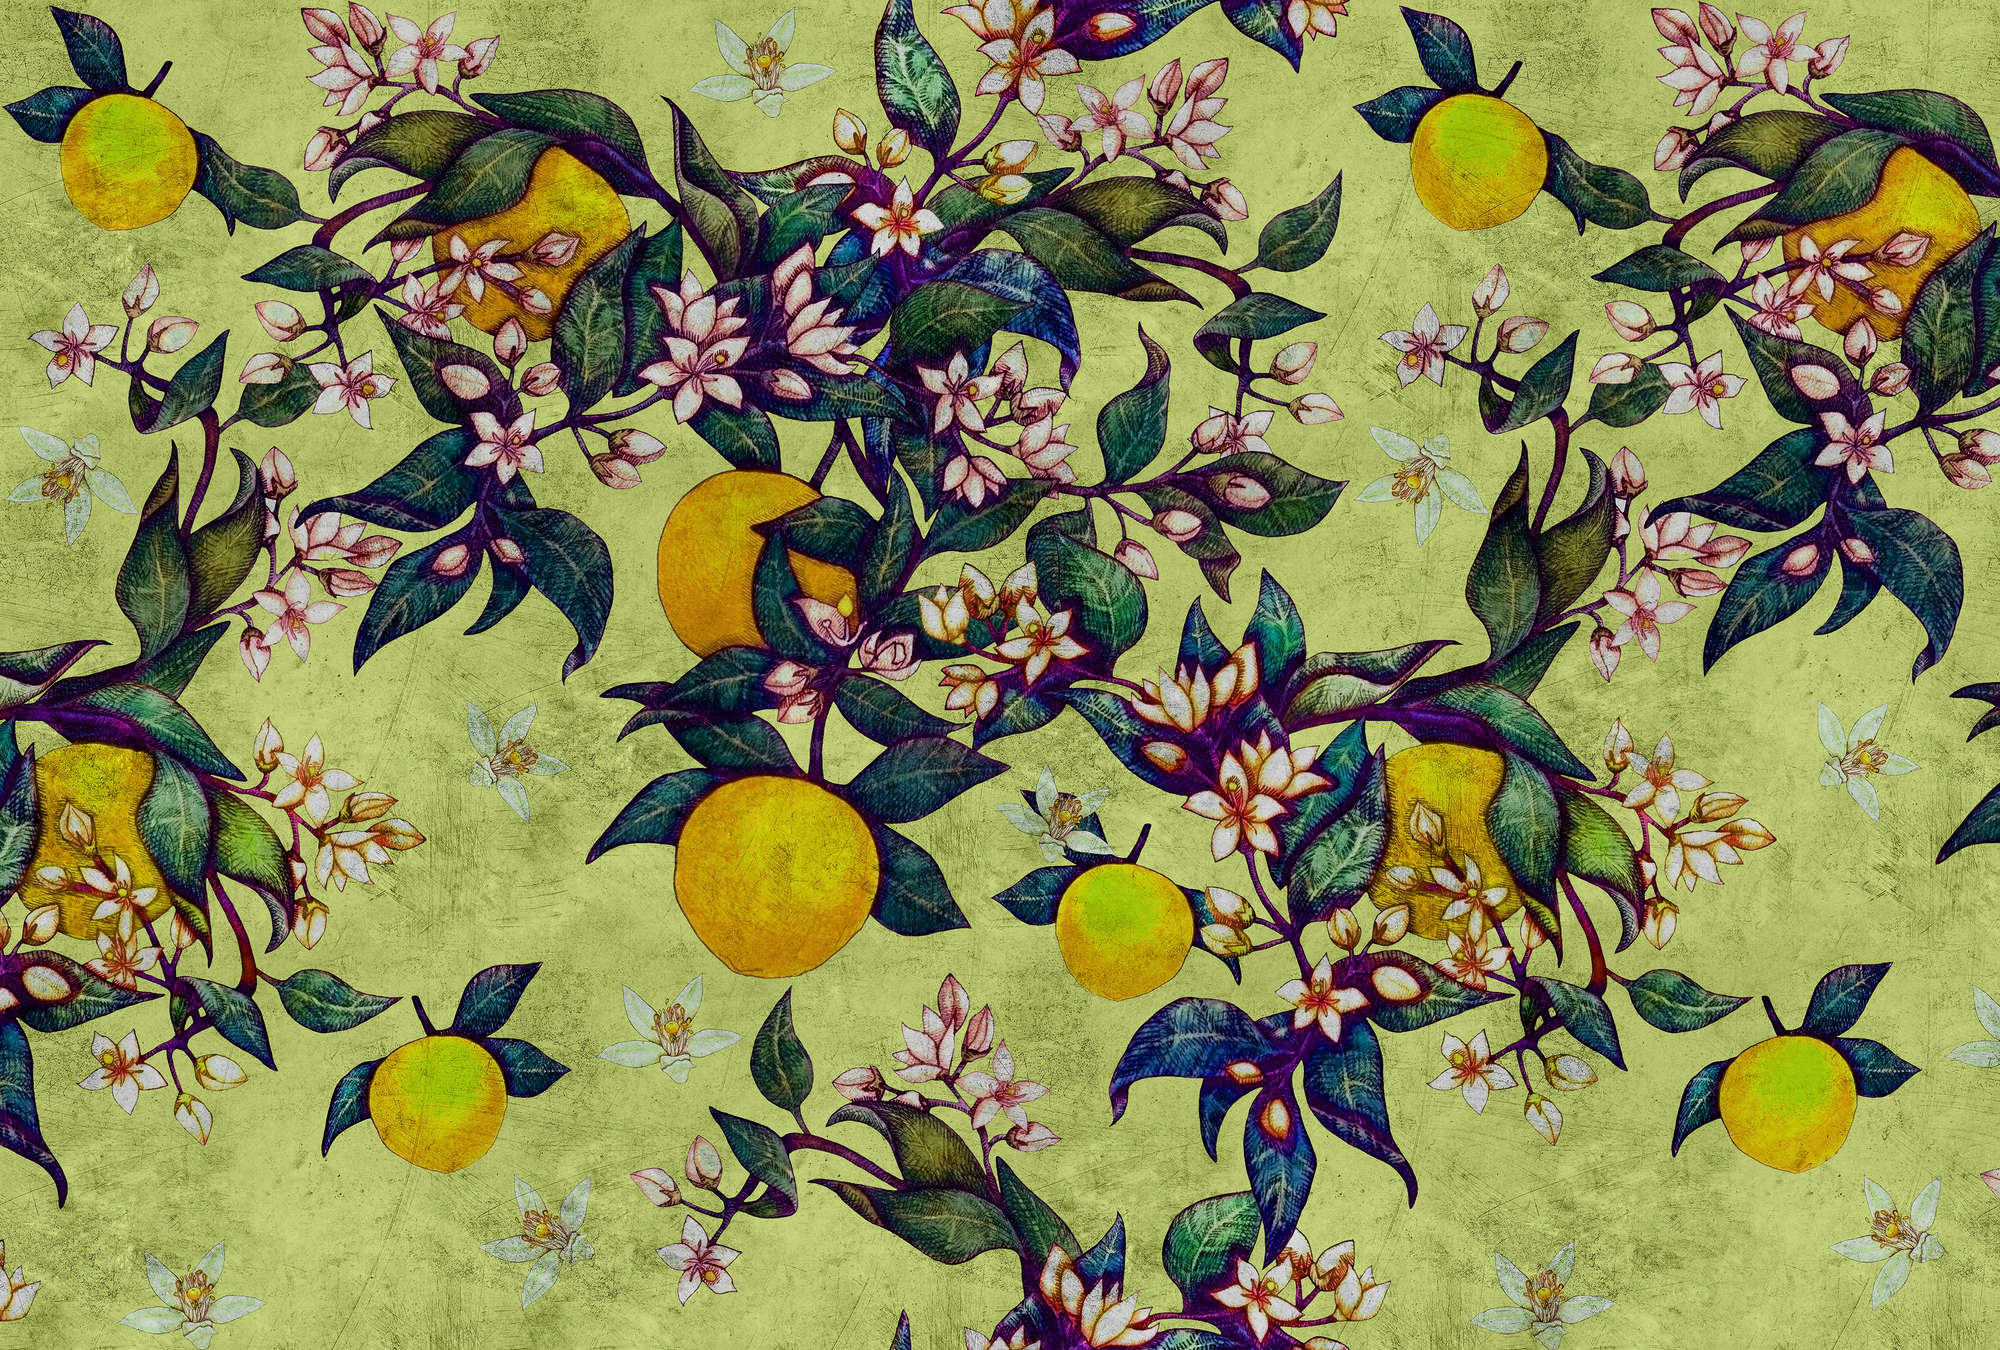             Grapefruit Tree 1 - Scratchy Textured Wallpaper with Citrus & Floral Pattern - Yellow, Green | Pearl Smooth Non-woven
        